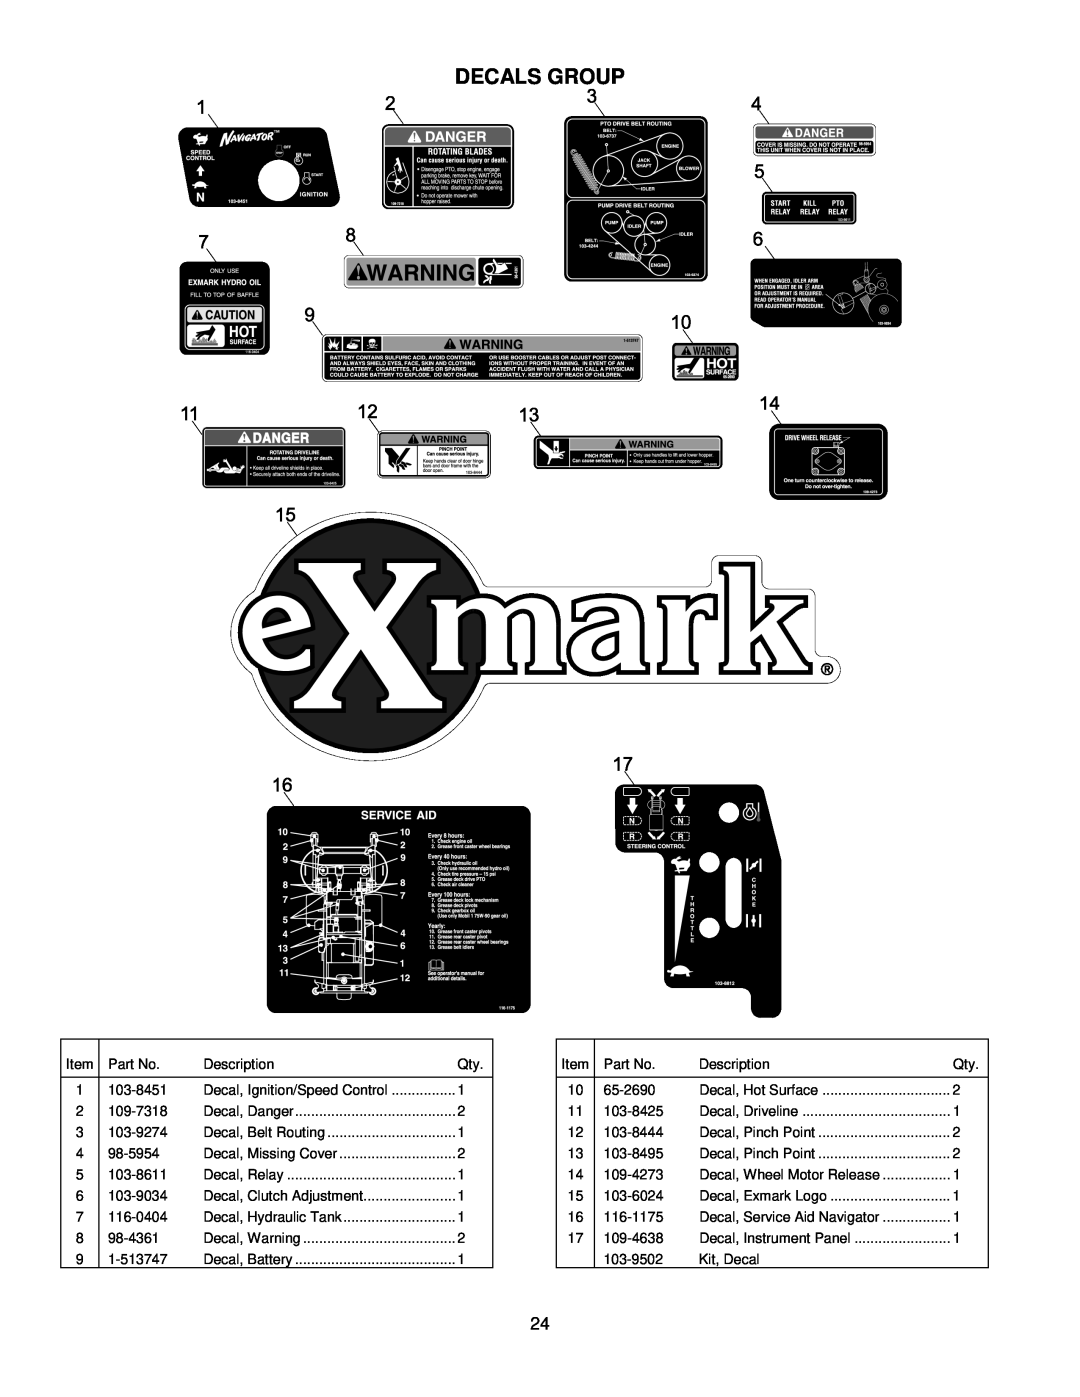 Exmark 4500-368 manual Decals Group 